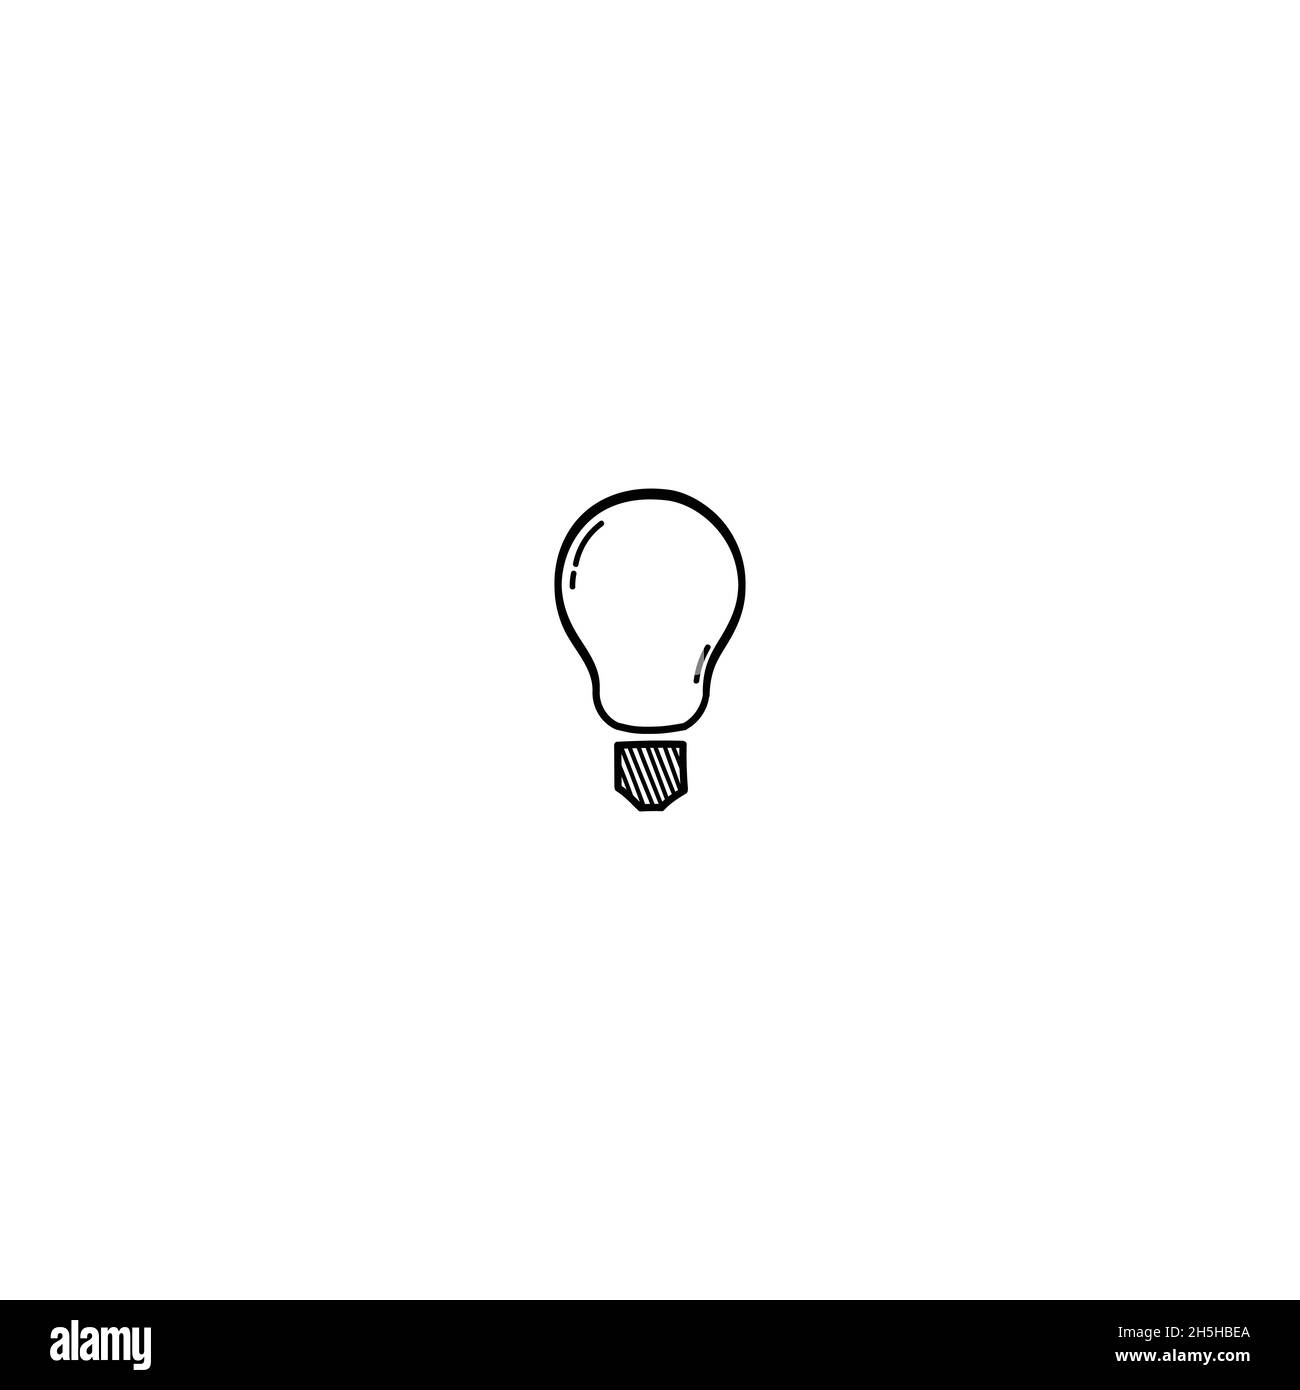 Hand Drawn bulb doodle illustration icon. Outline hand drawn bulb vector icon illustrations isolated on white background. Stock Vector